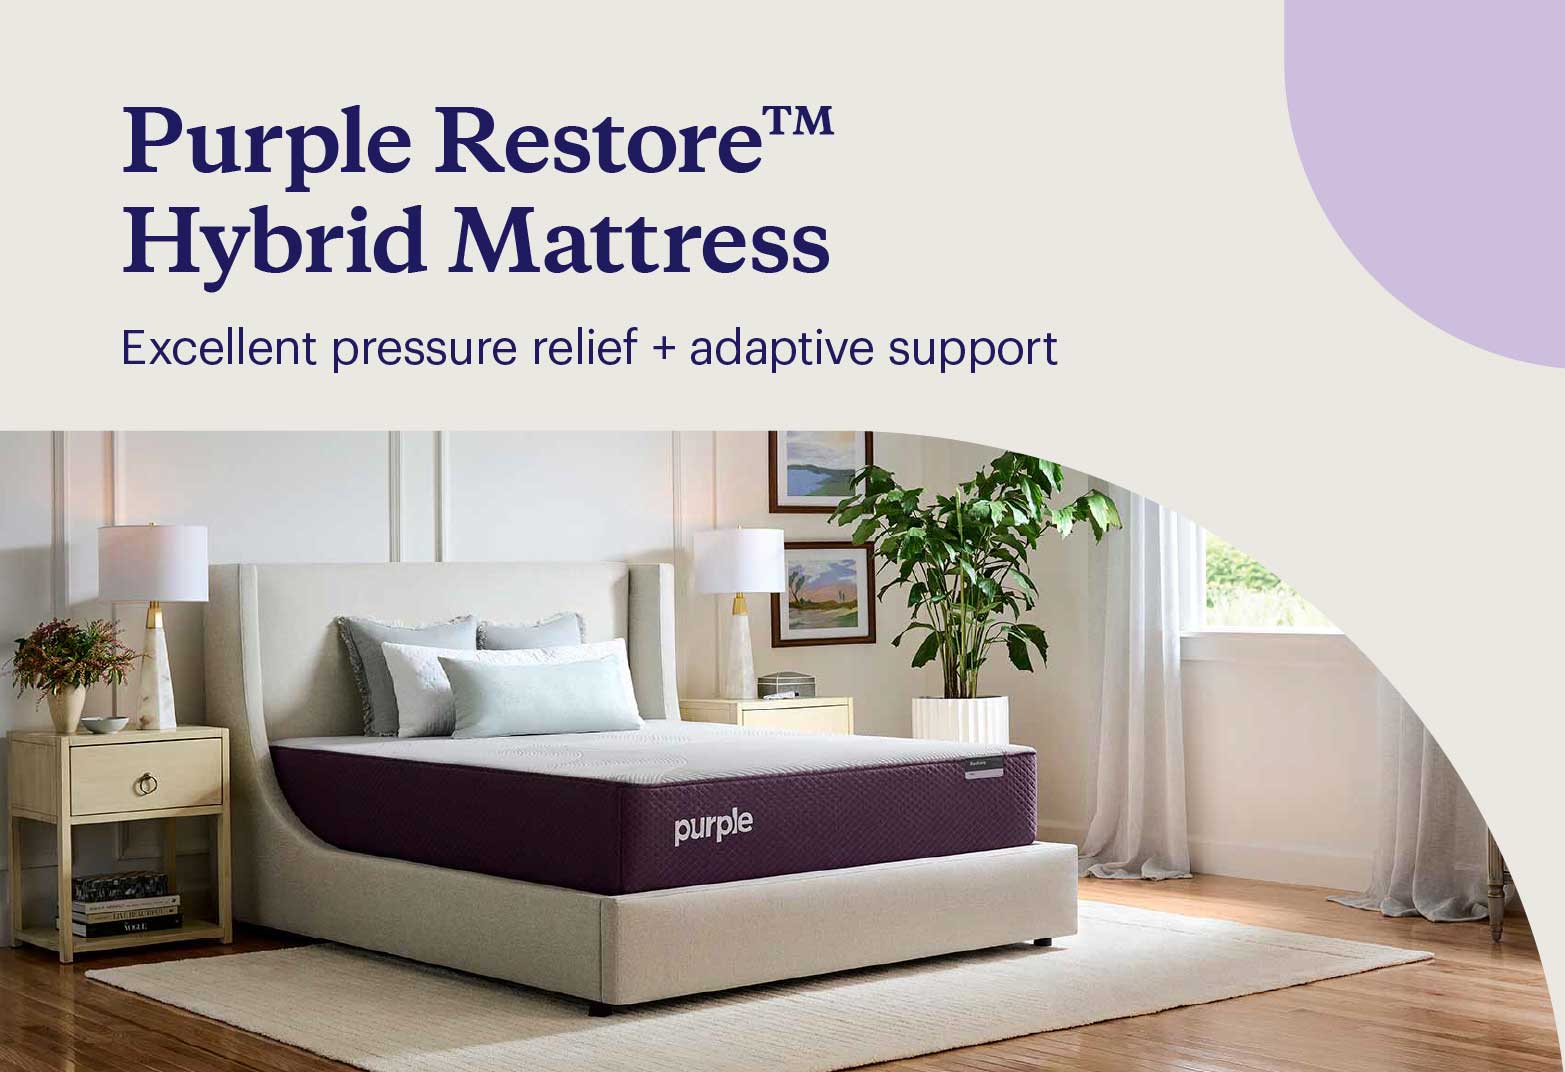 Key features of the Purple Restore™ Hybrid shown with the mattress on an upholstered bedframe with pillows and bedroom furniture.